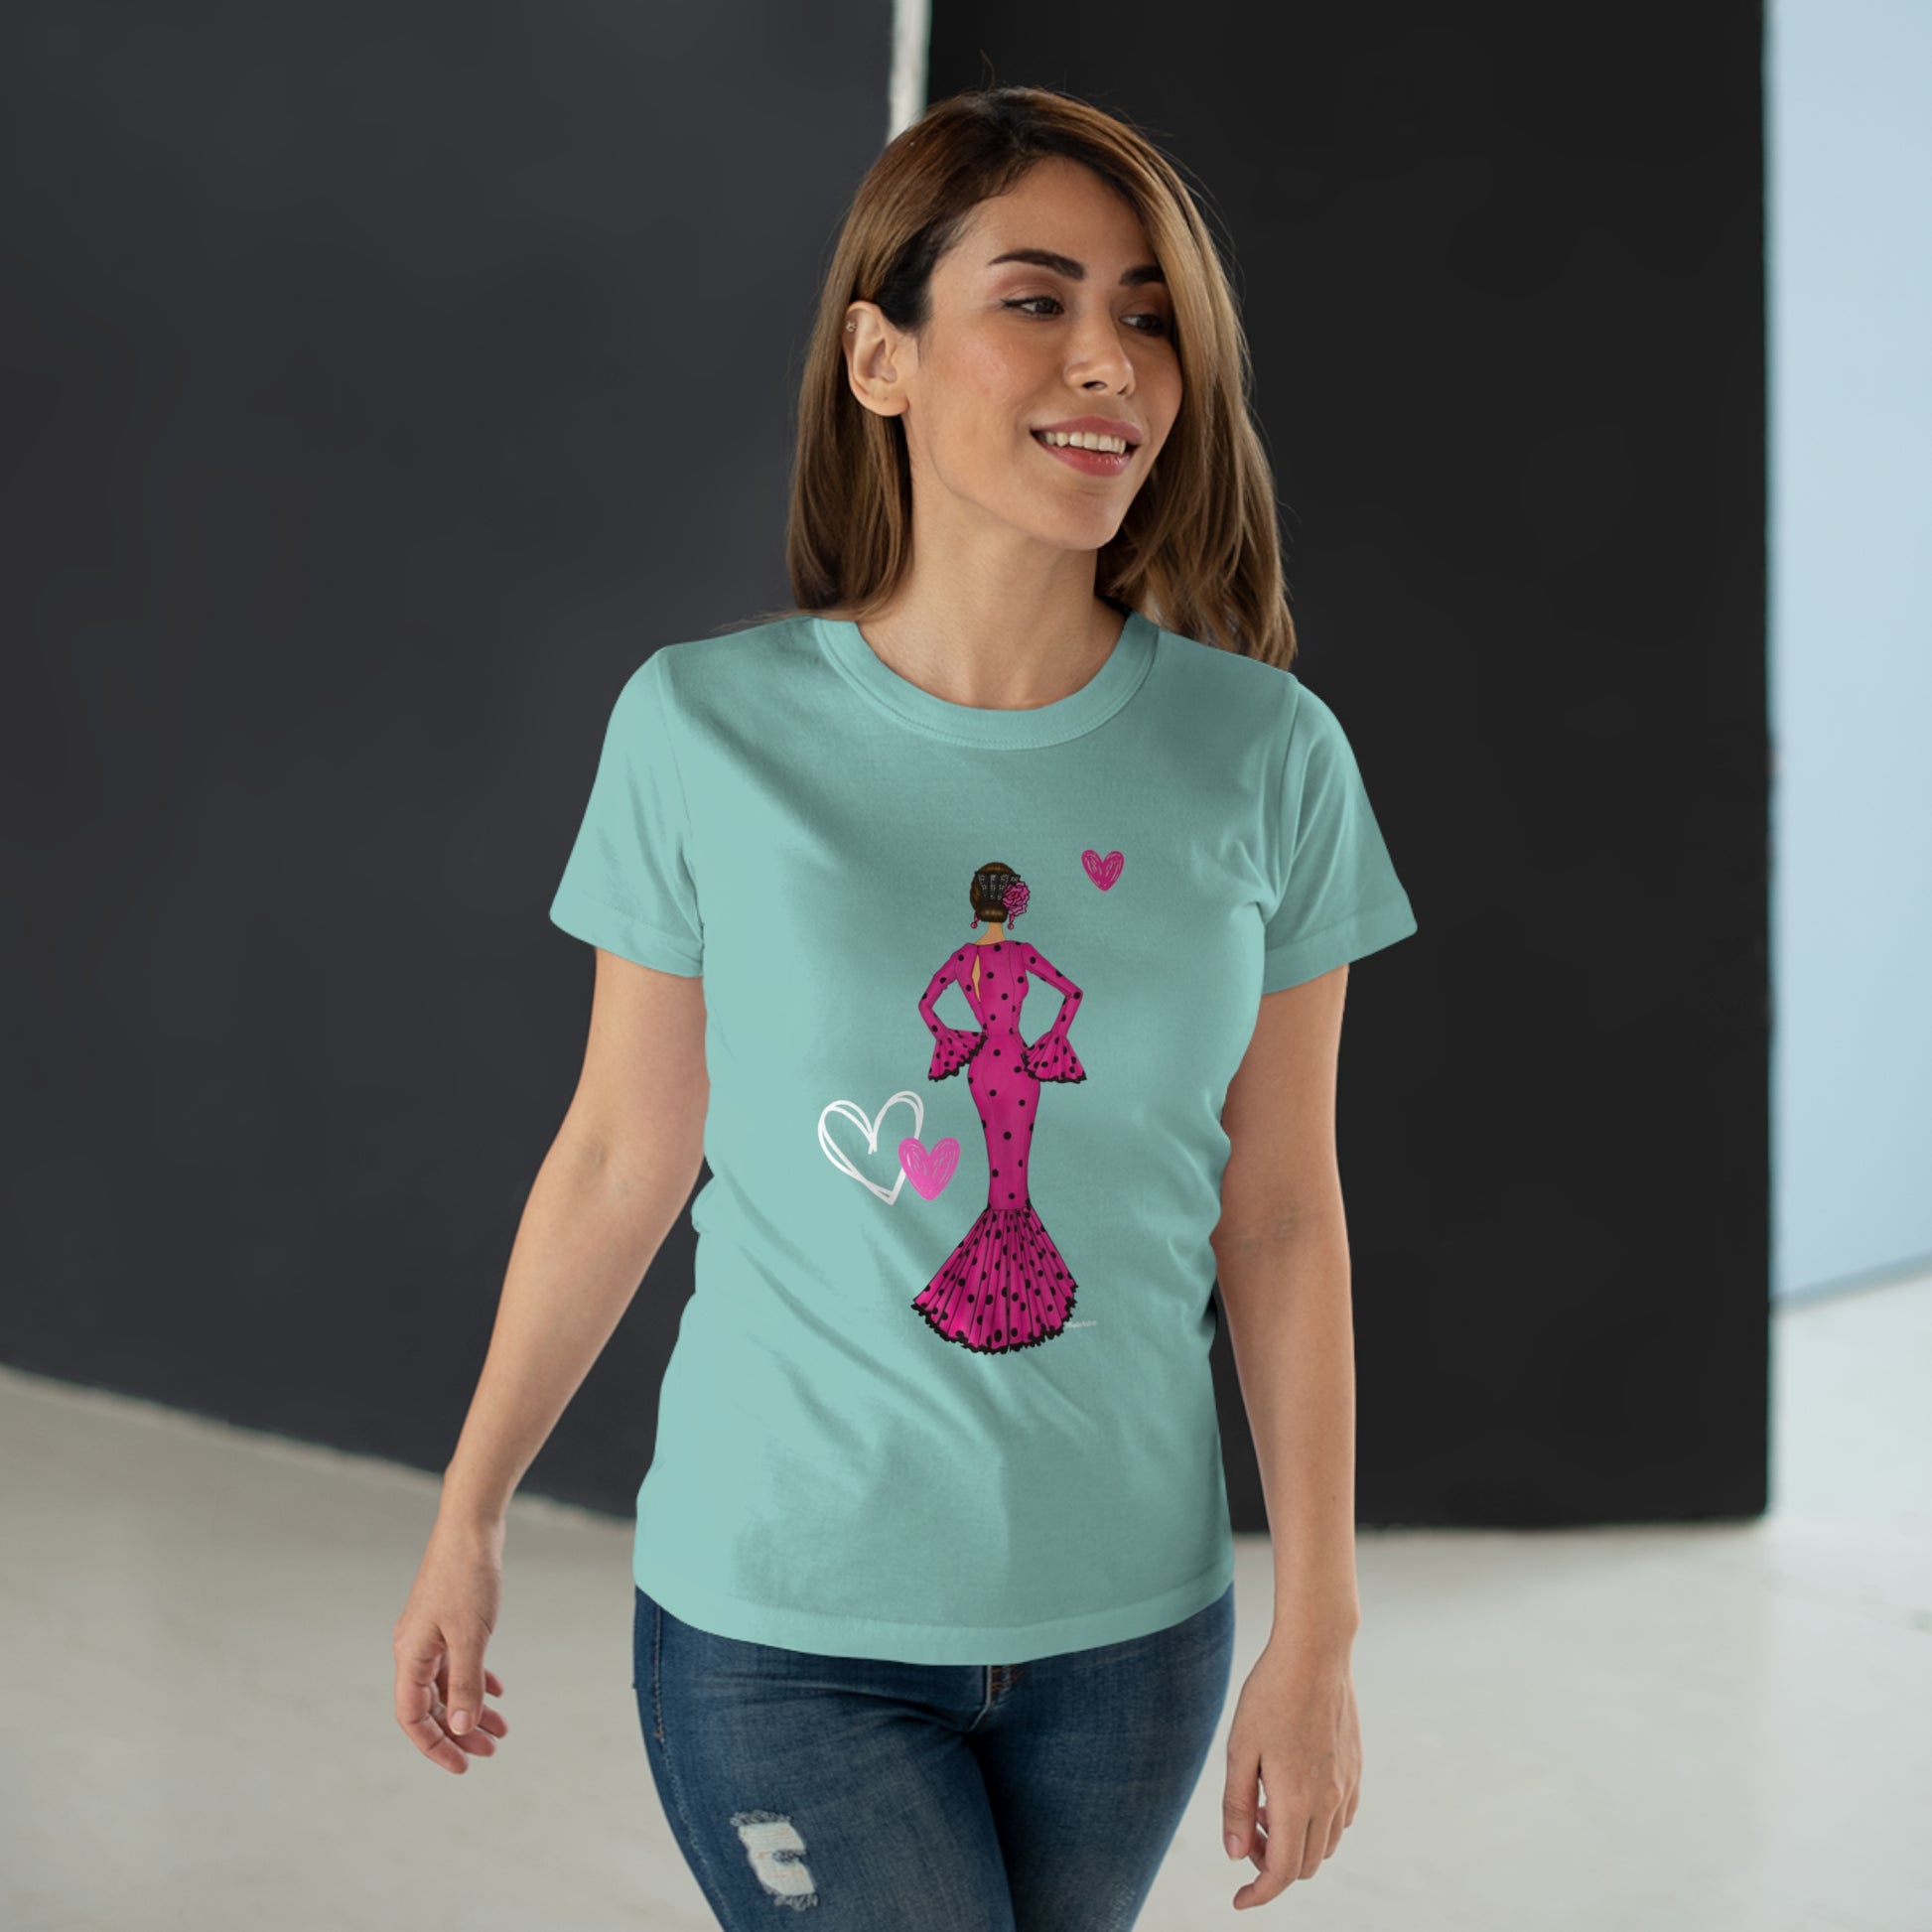 a woman wearing a t - shirt with a pink dress on it